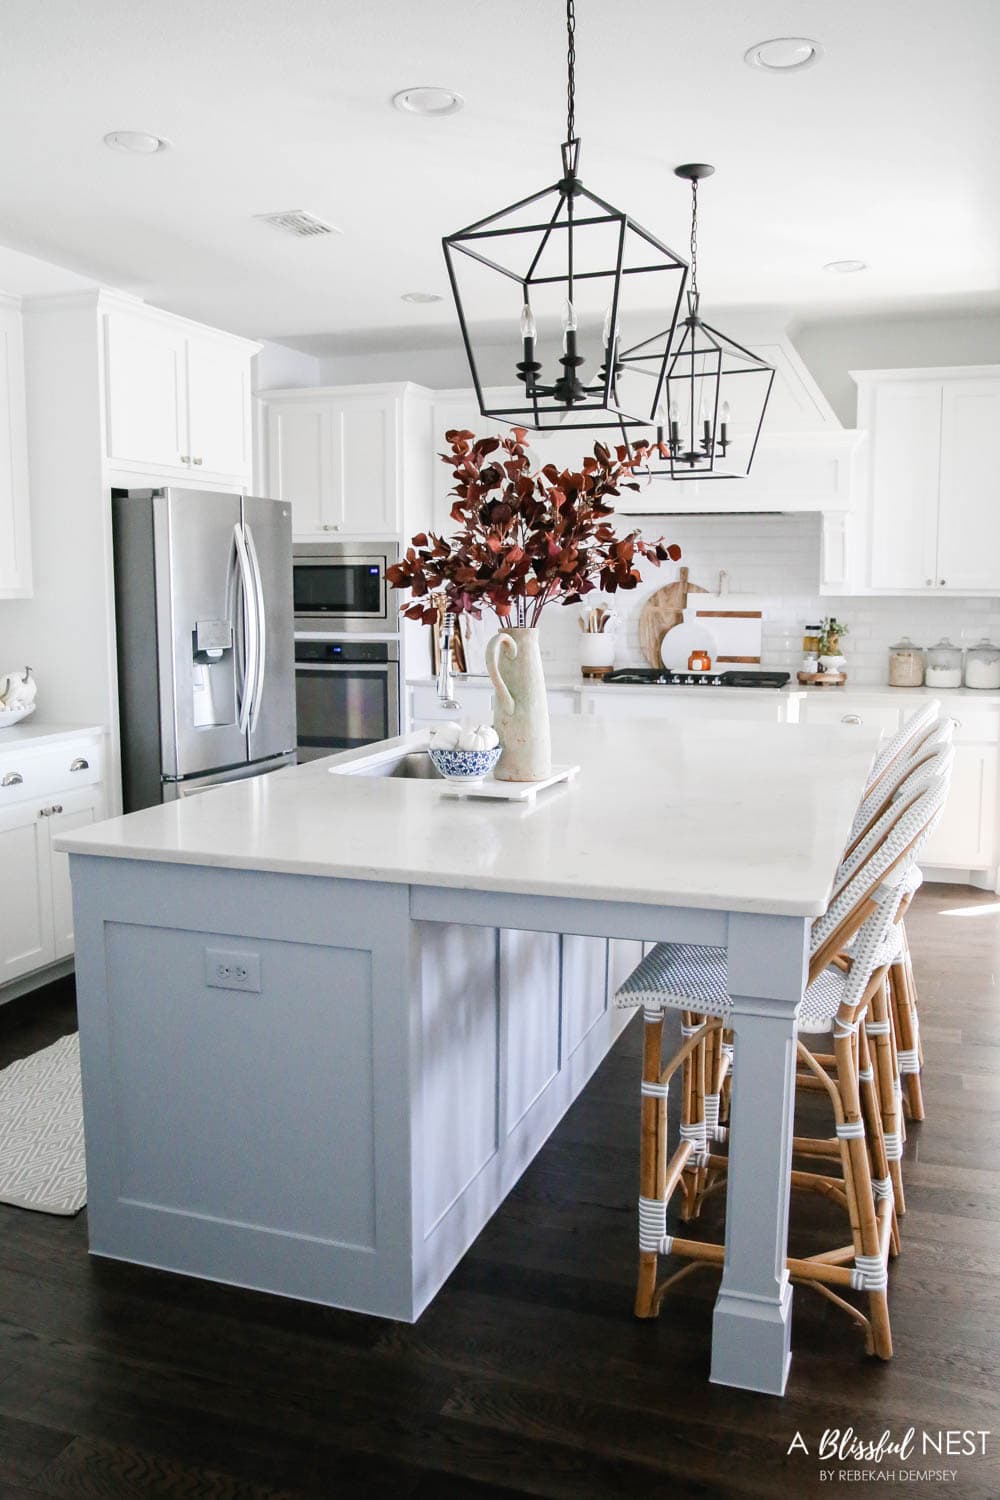 Beautiful fall decor details in this kitchen with burgundy eucalyptus leaves, delicious fall candles, Serena and Lily barstools. #ABlissfulNest #fallkitchen #falldecor #fallideas